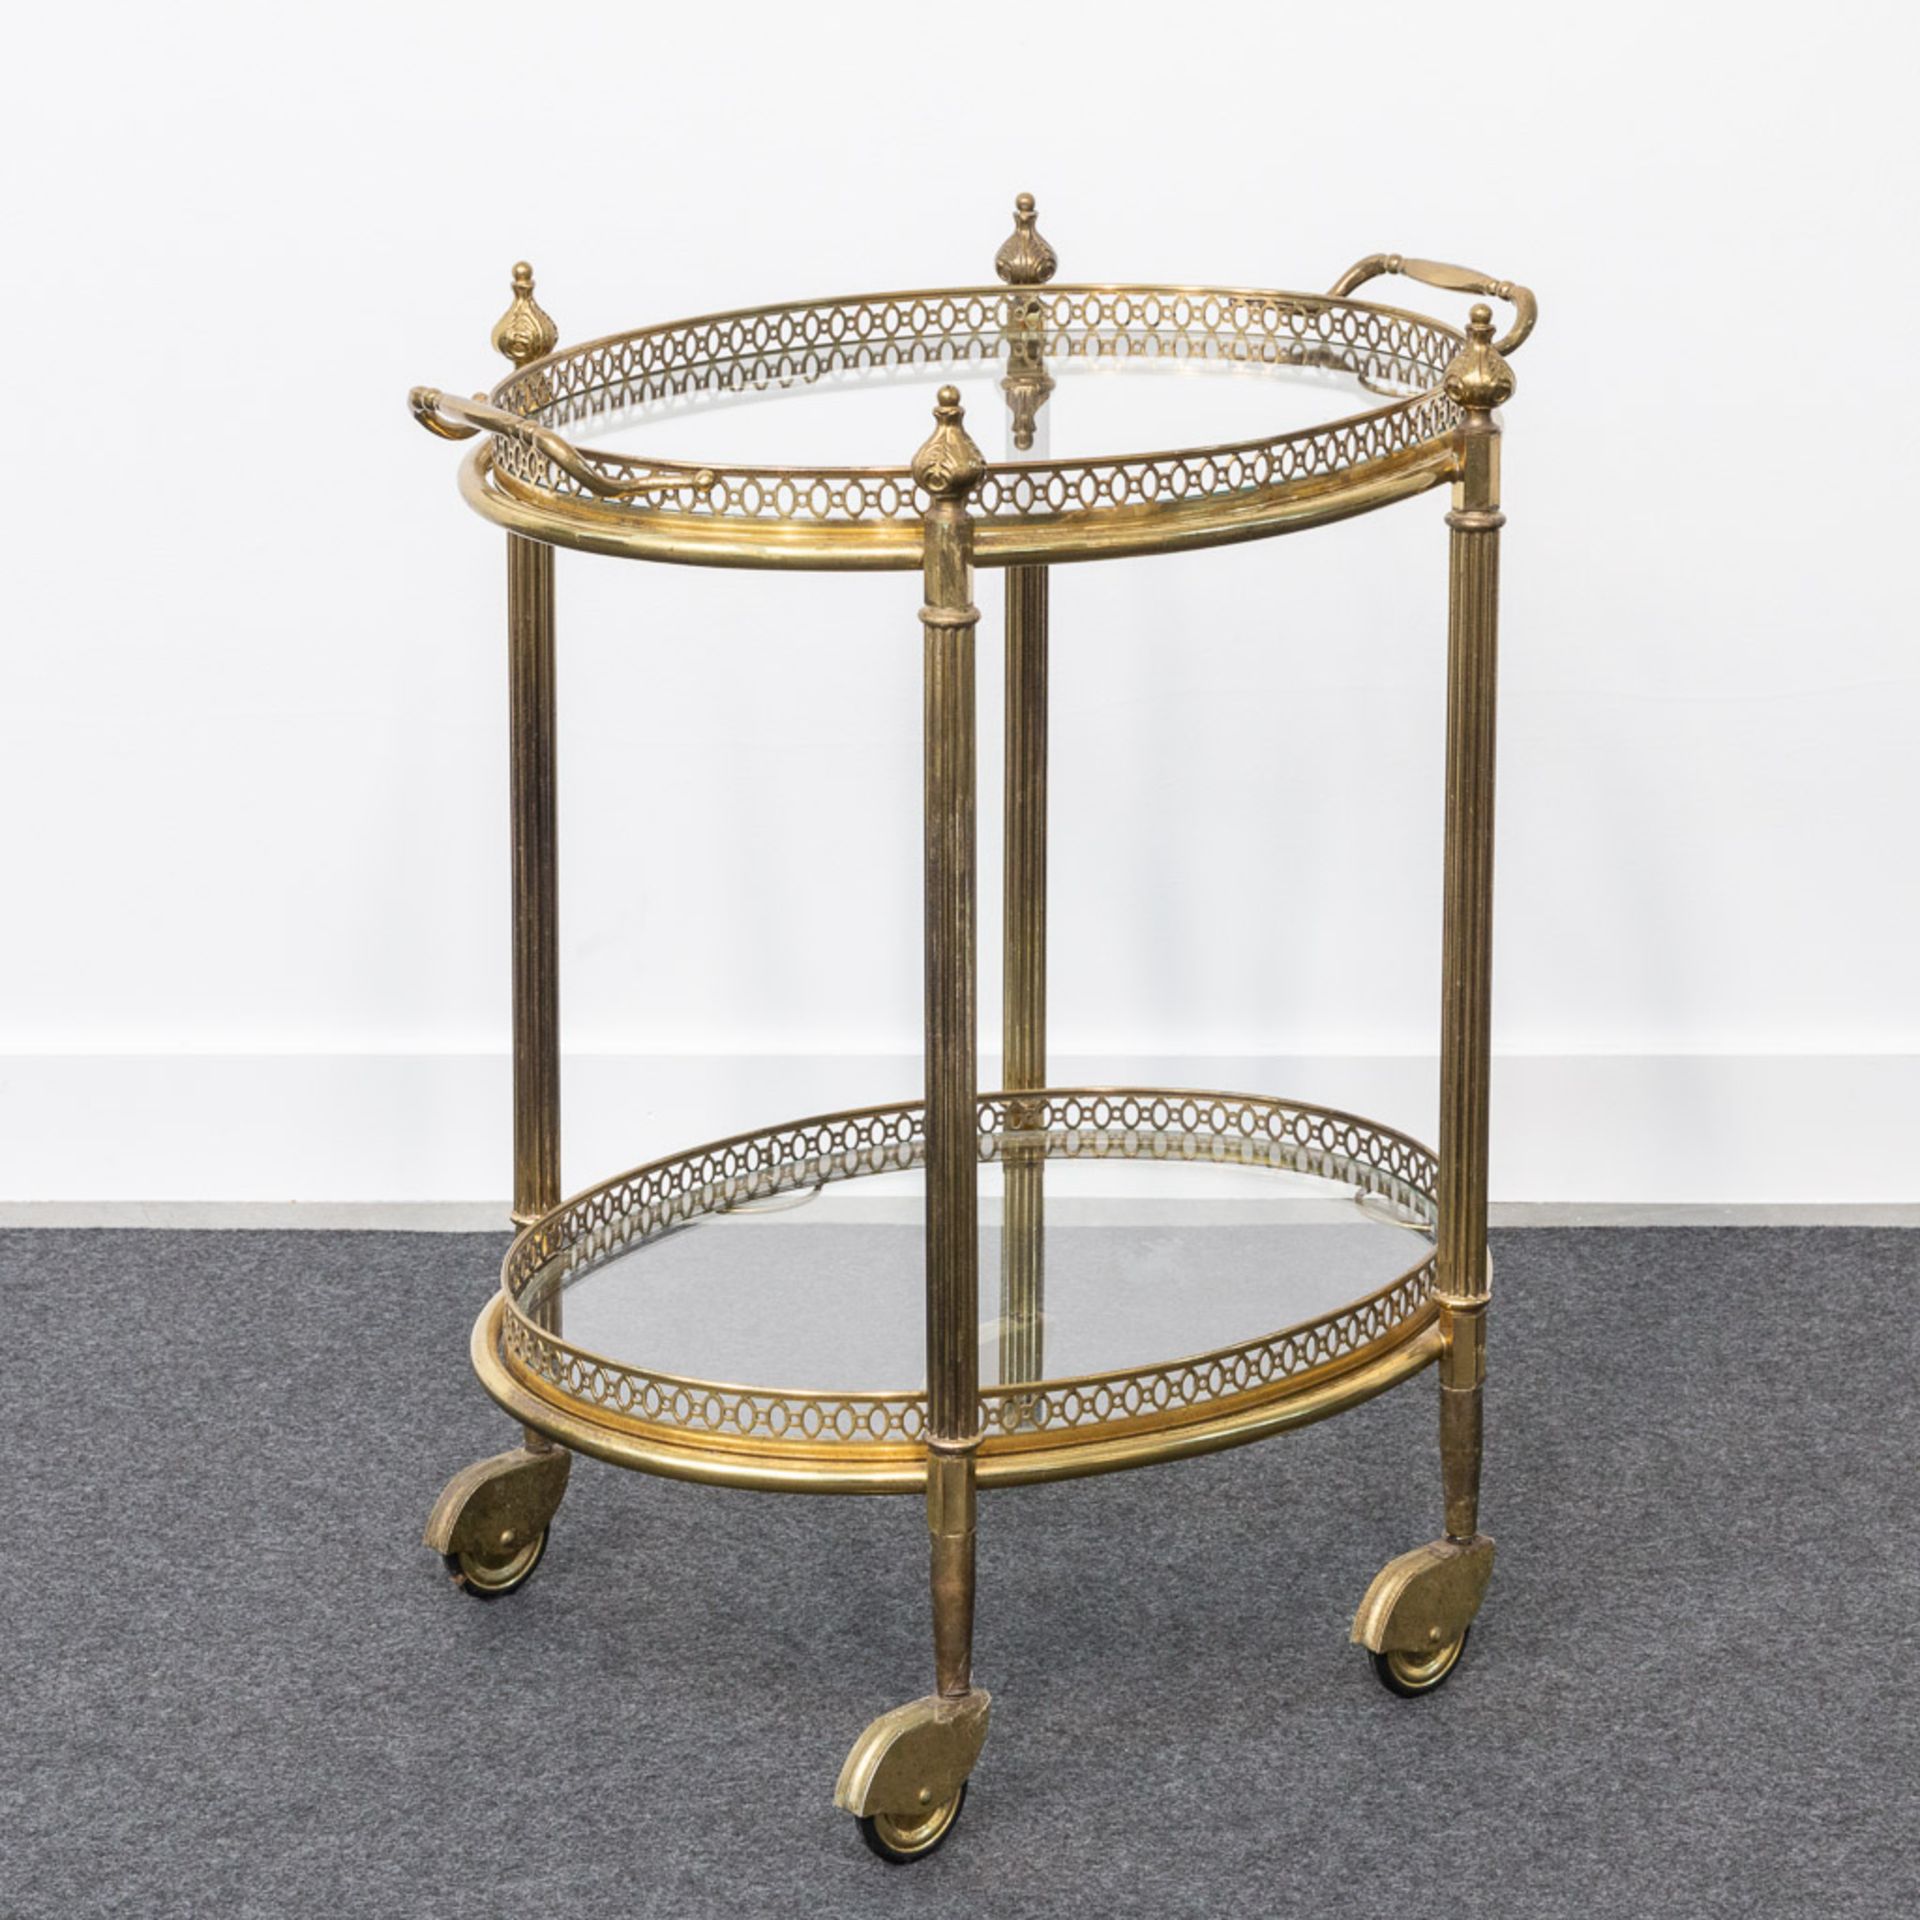 A metal and glass side table on wheels, in the style of Maison Jansen.